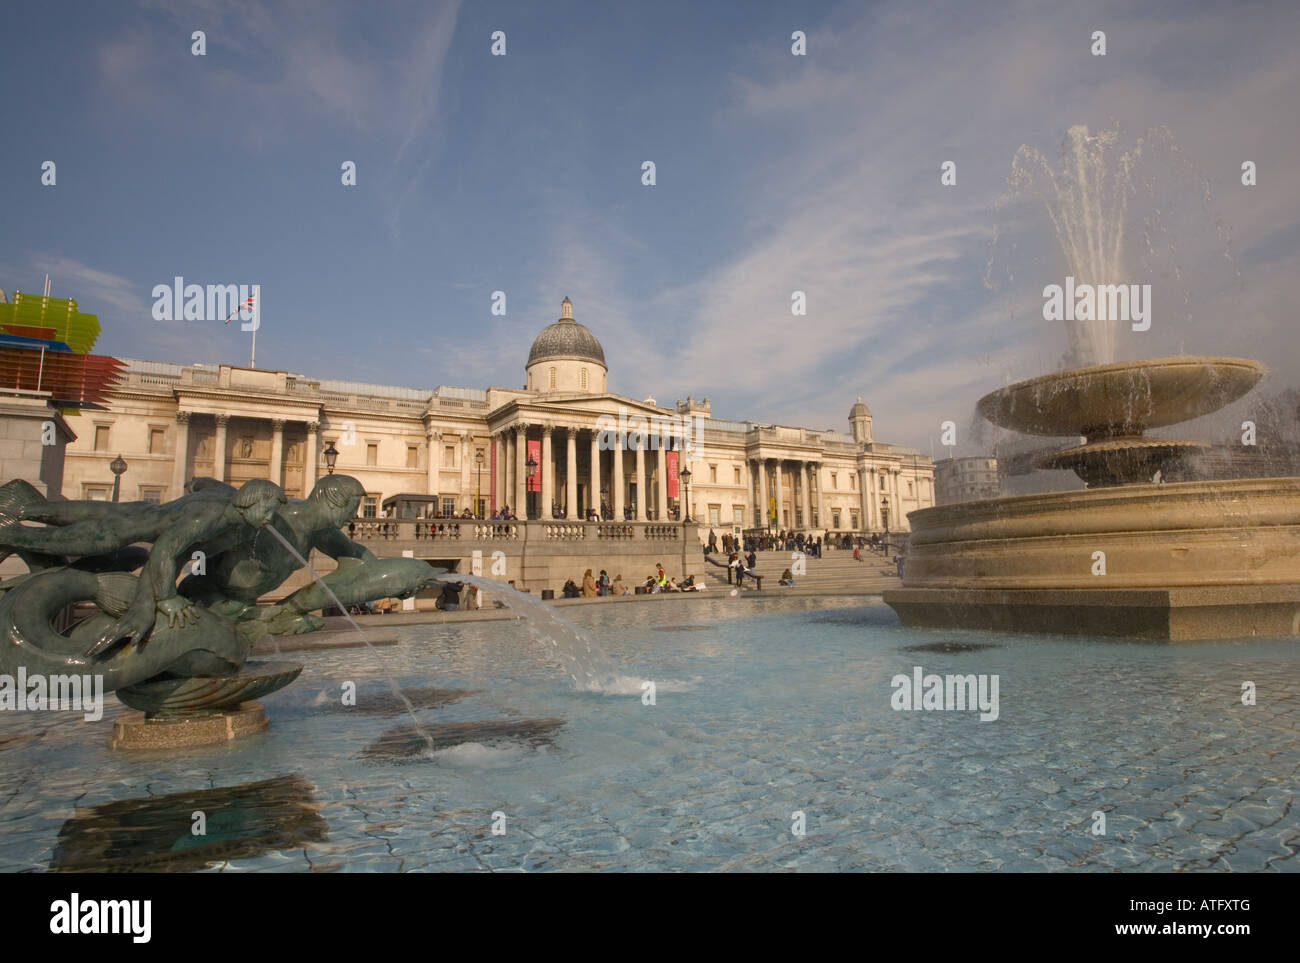 The National Gallery and fountains in Trafalgar Square London Stock Photo